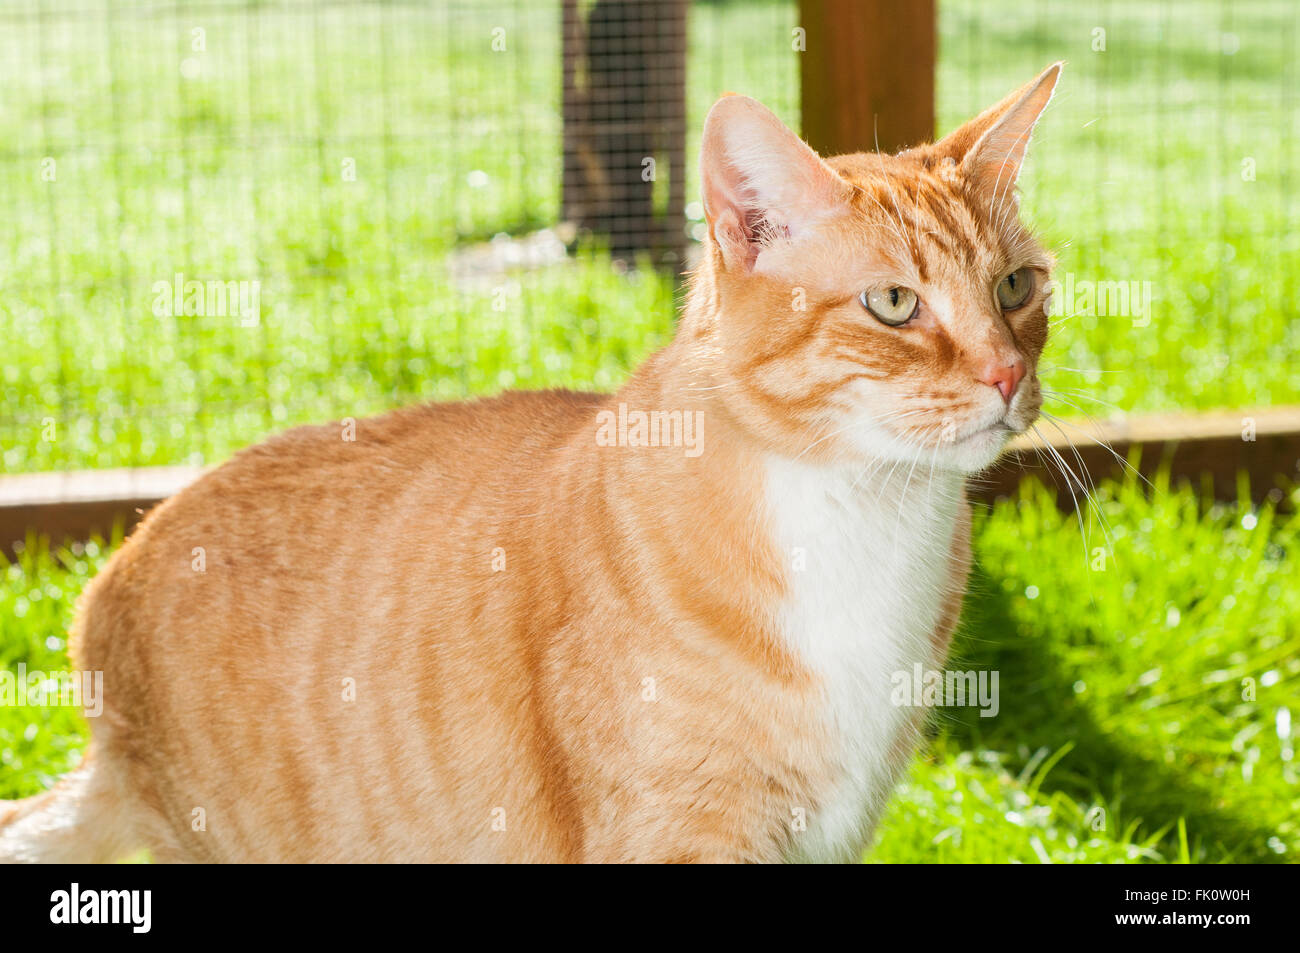 An orange tabby domestic short haired cat looking wild in a 'catio' outdoor cat enclosure. Stock Photo